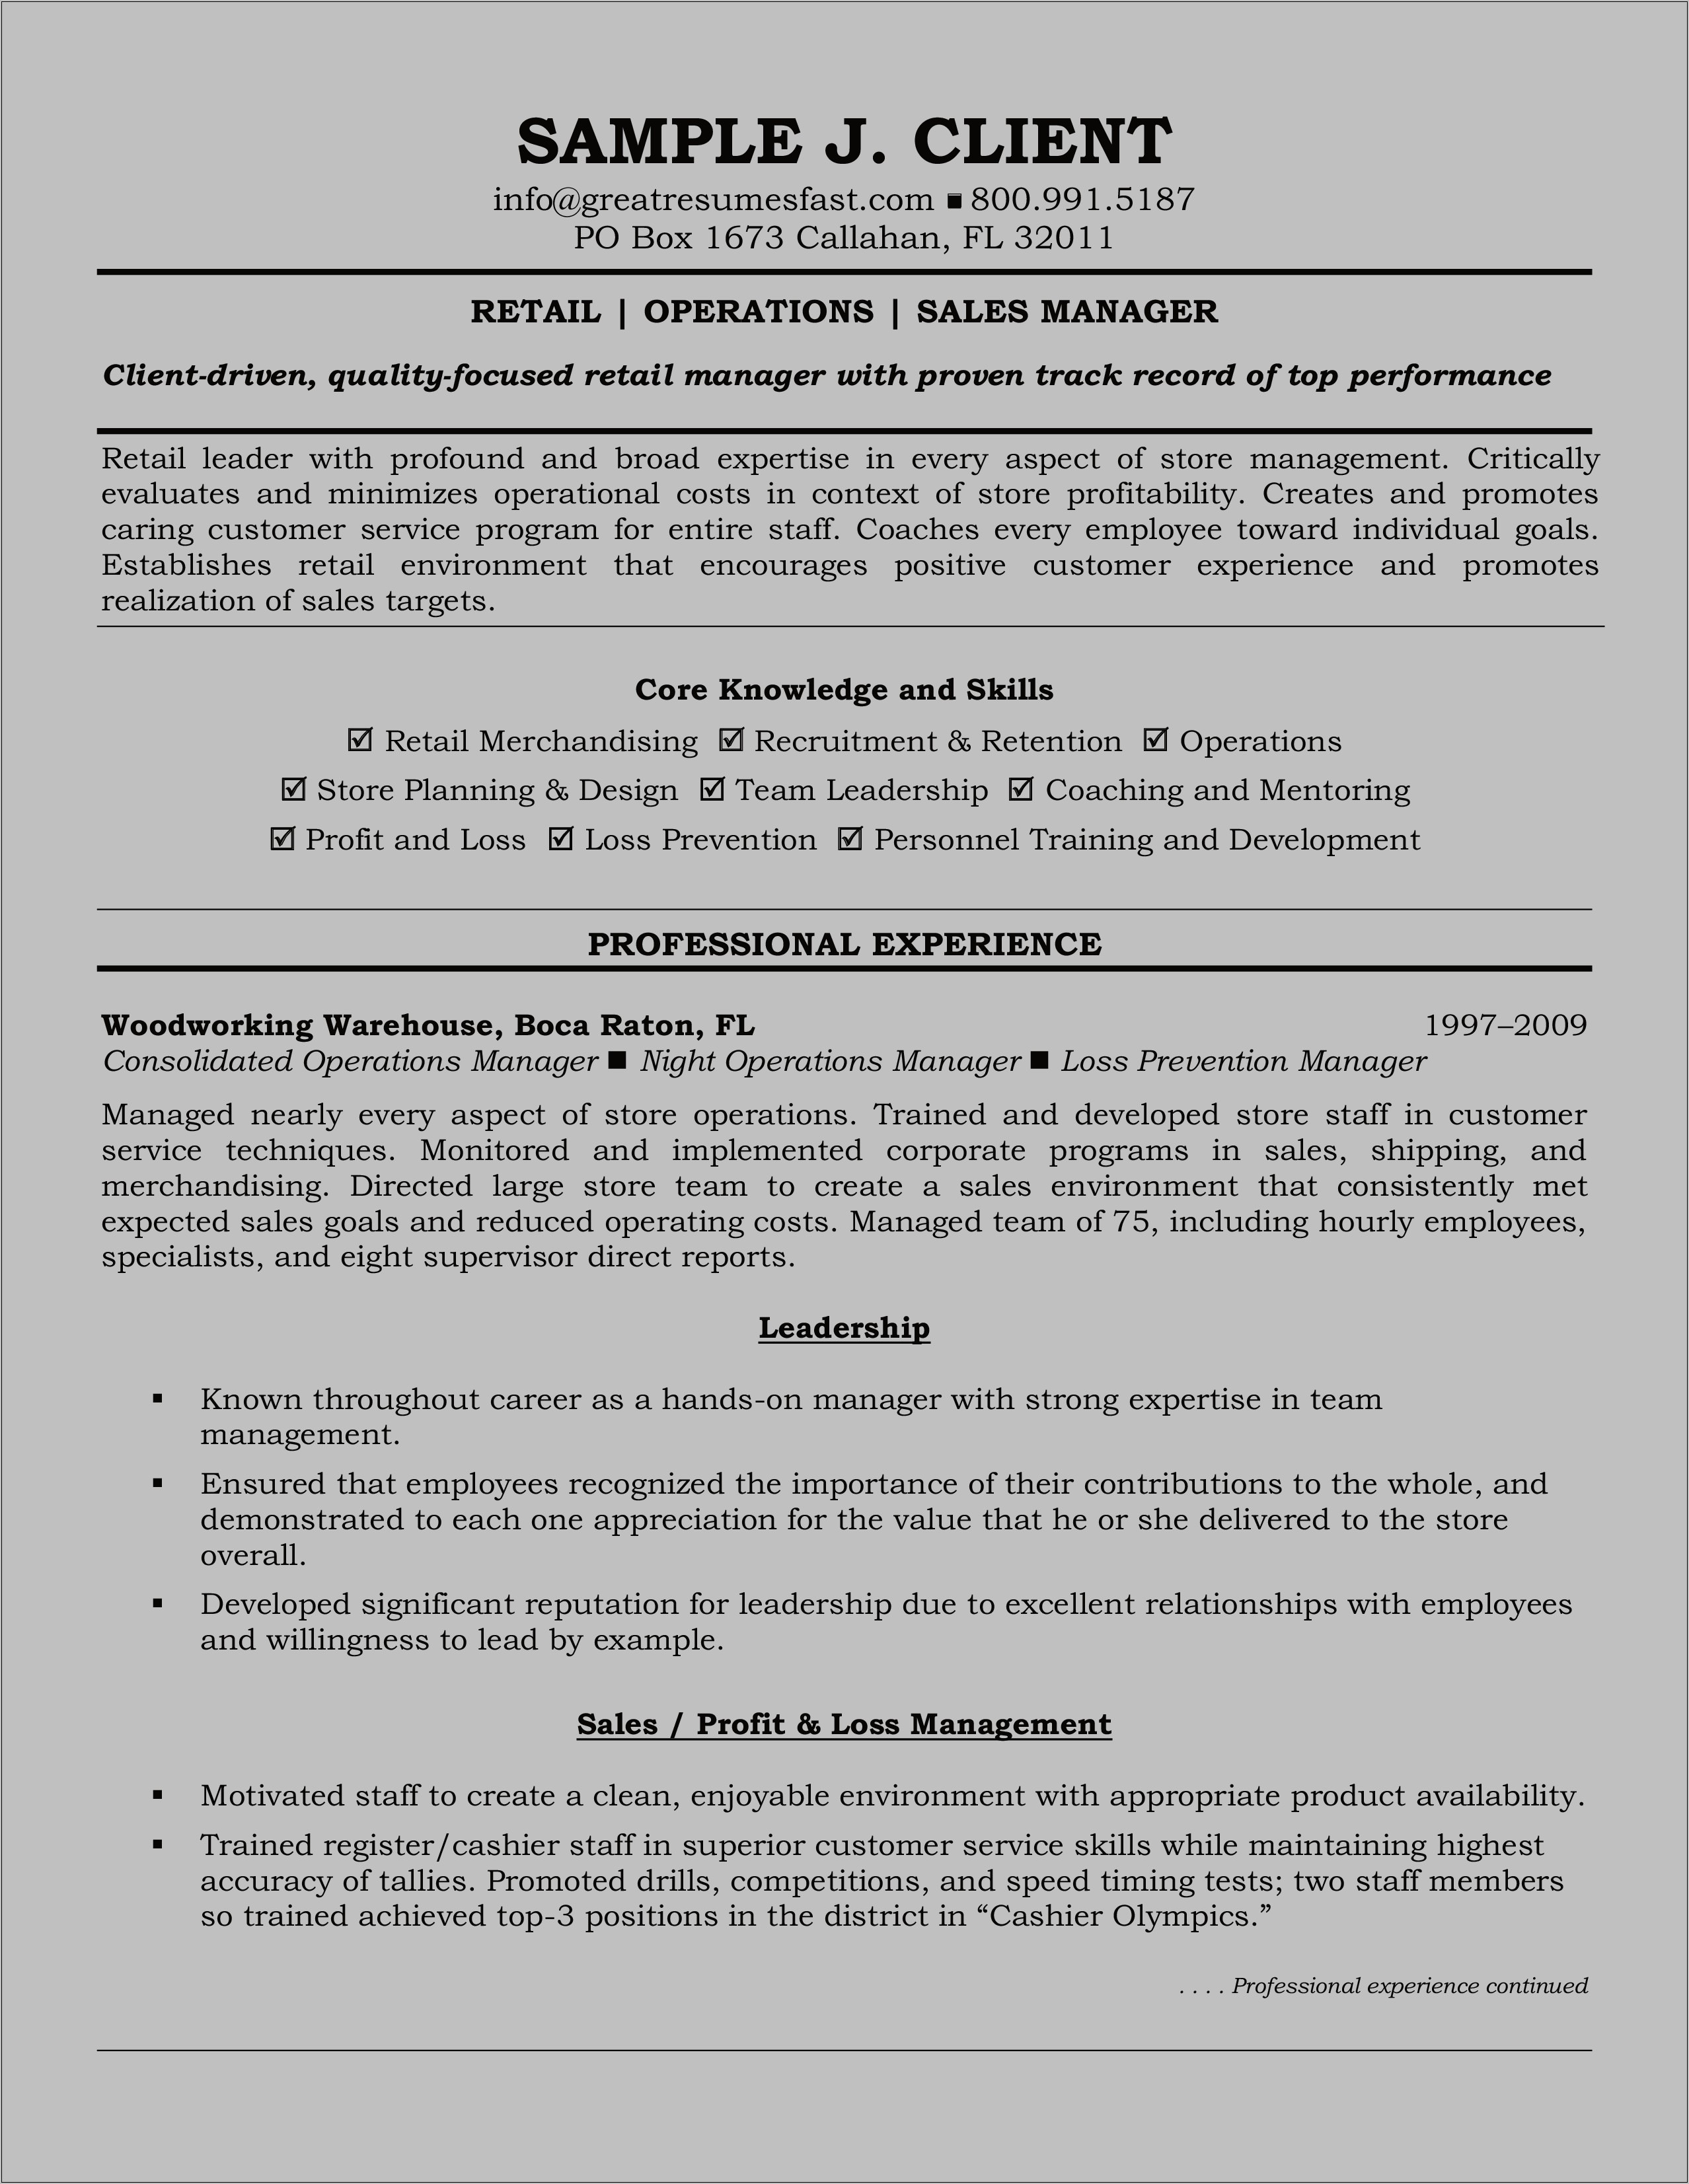 loss-prevention-manager-resume-templates-resume-example-gallery